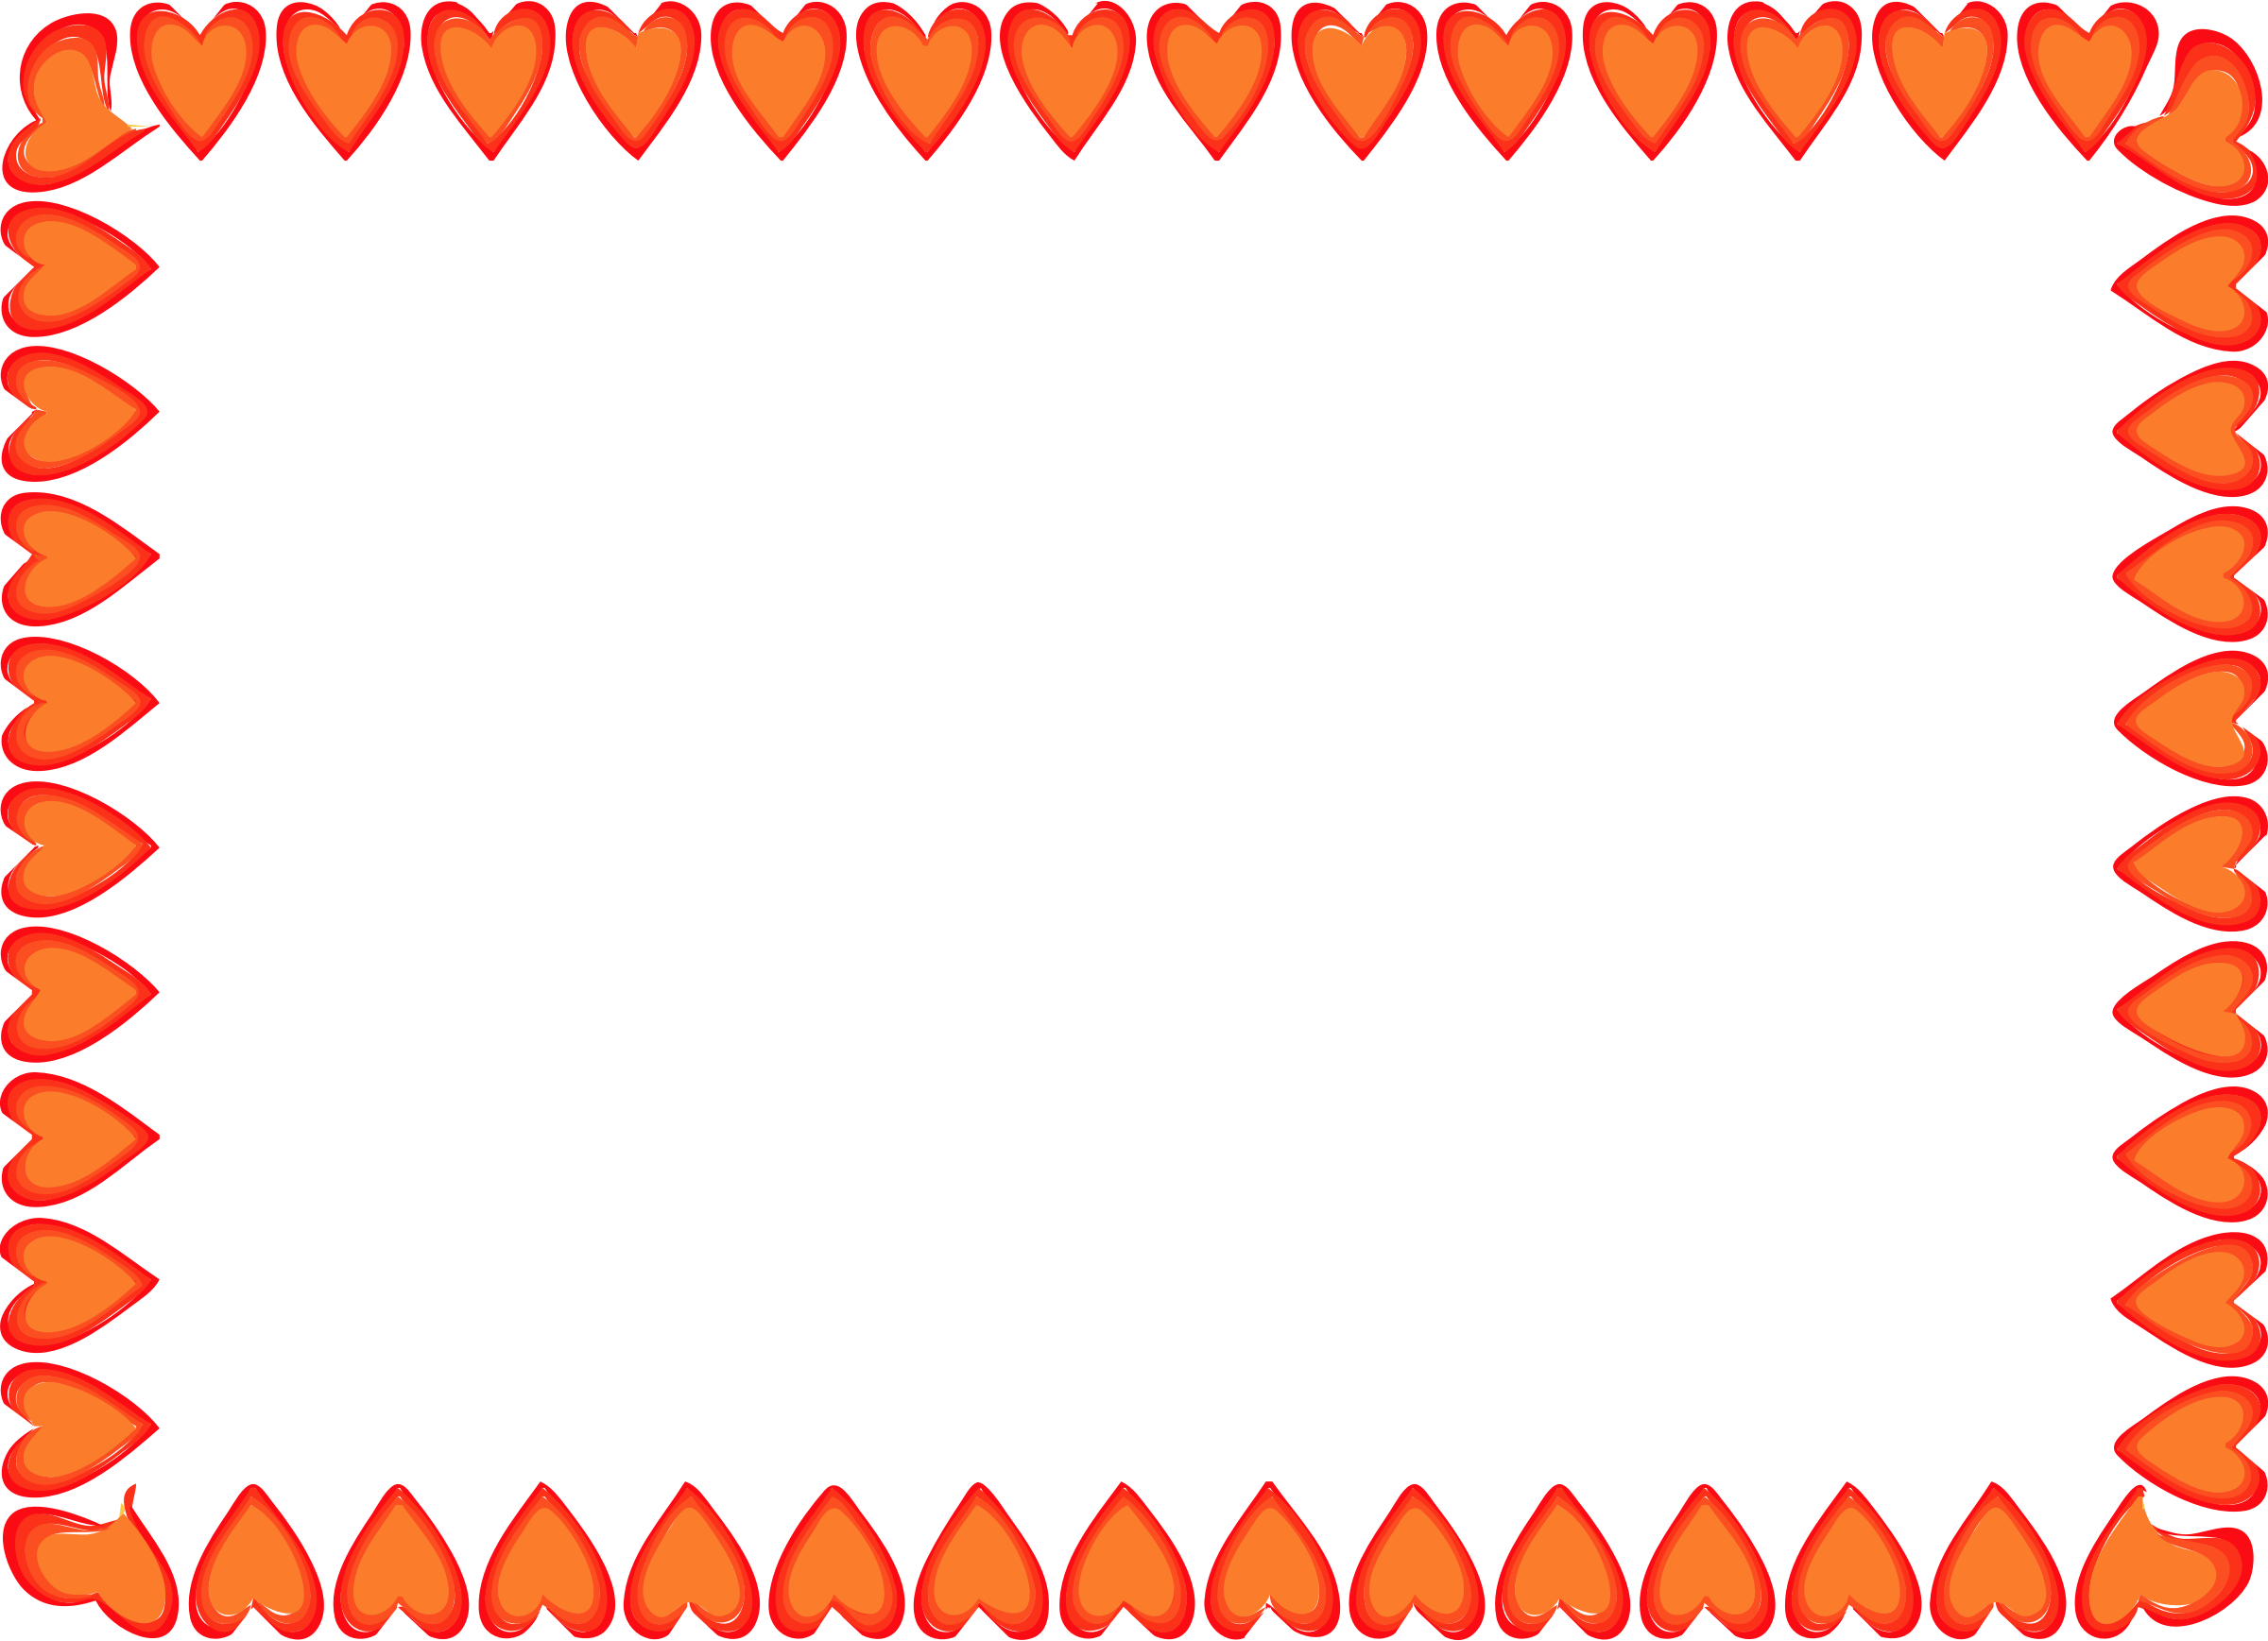 Clipart - Red Hearts Border